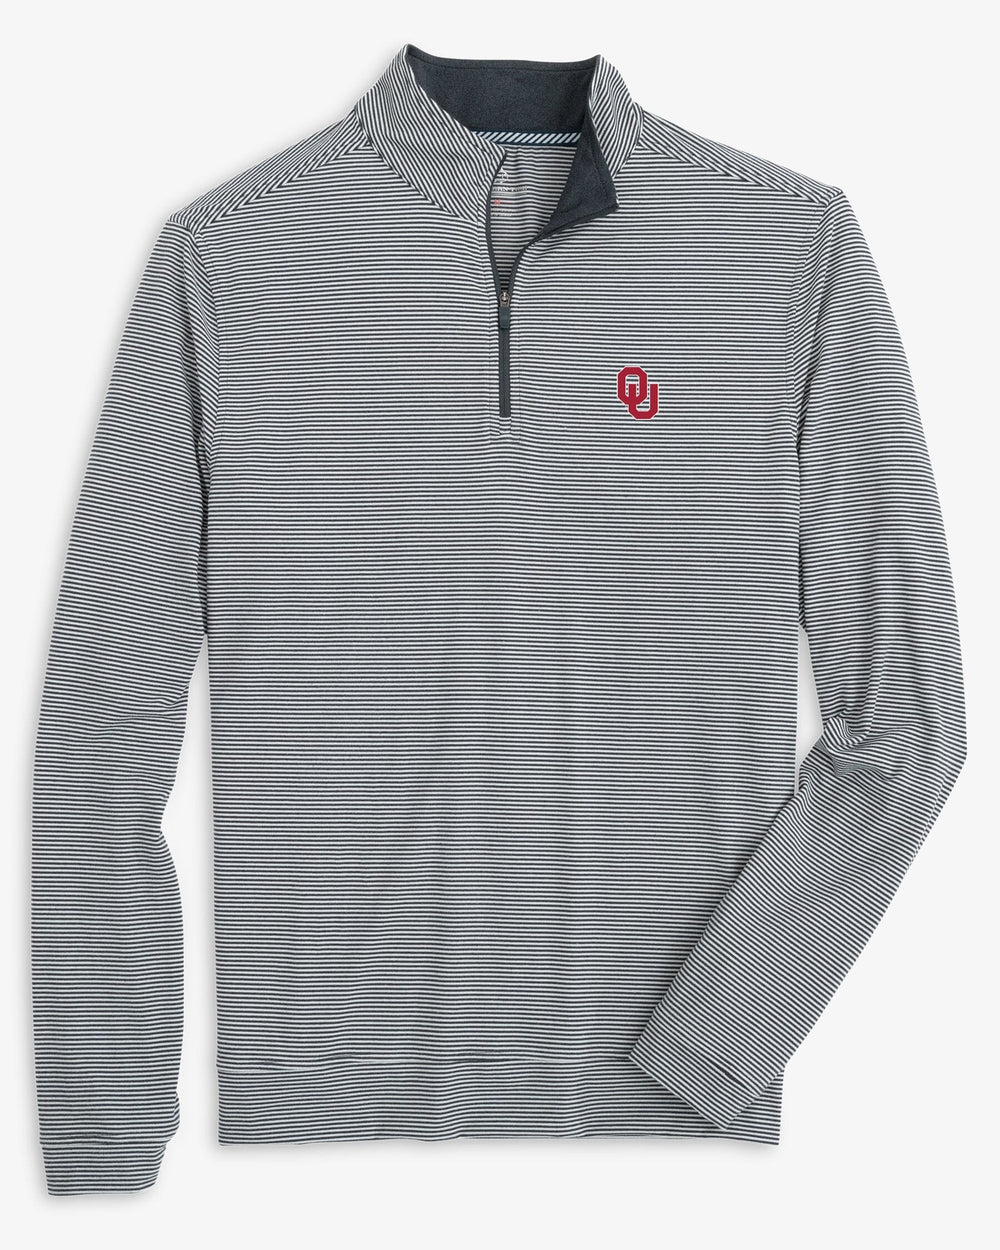 The front view of the Oklahoma Sooners Cruiser Micro-Stripe Heather Quarter Zip by Southern Tide - Heather Black